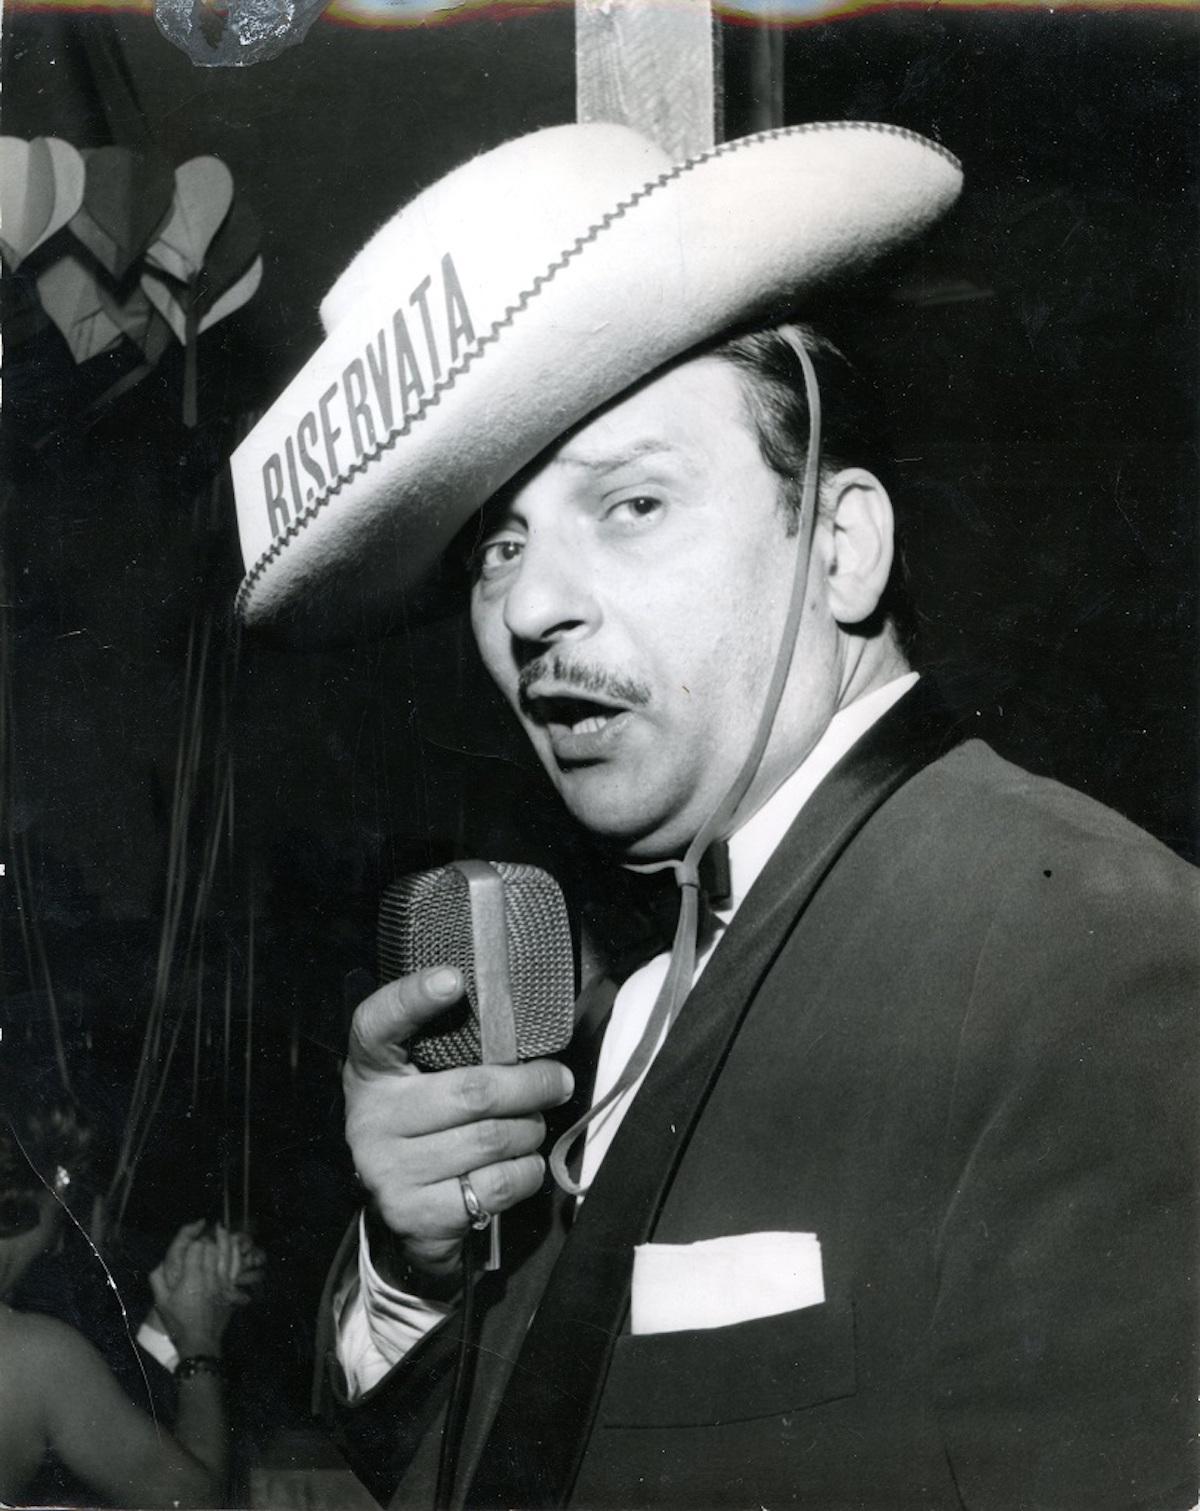 Fred Buscaglione by Giancolombo - Vintage b/w Photo - 1950s